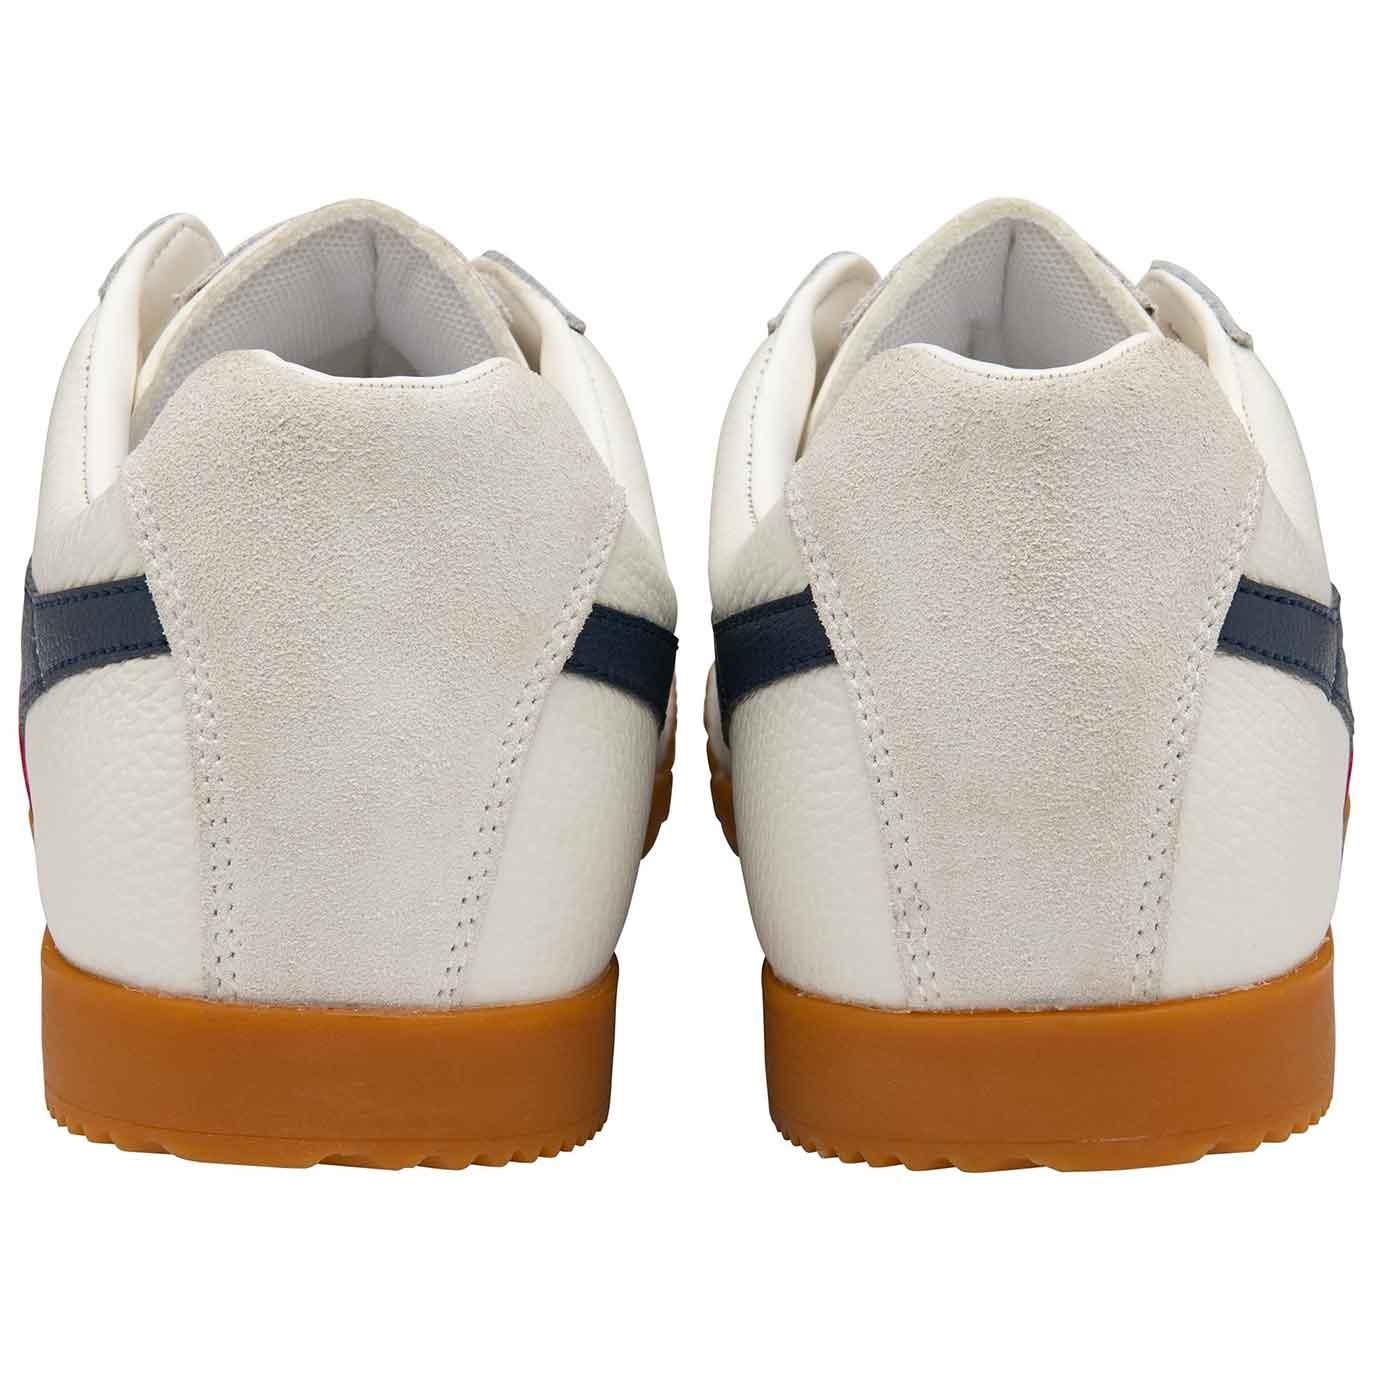 GOLA Harrier Leather Mens Retro Indie Mod Trainers White/Navy/Red